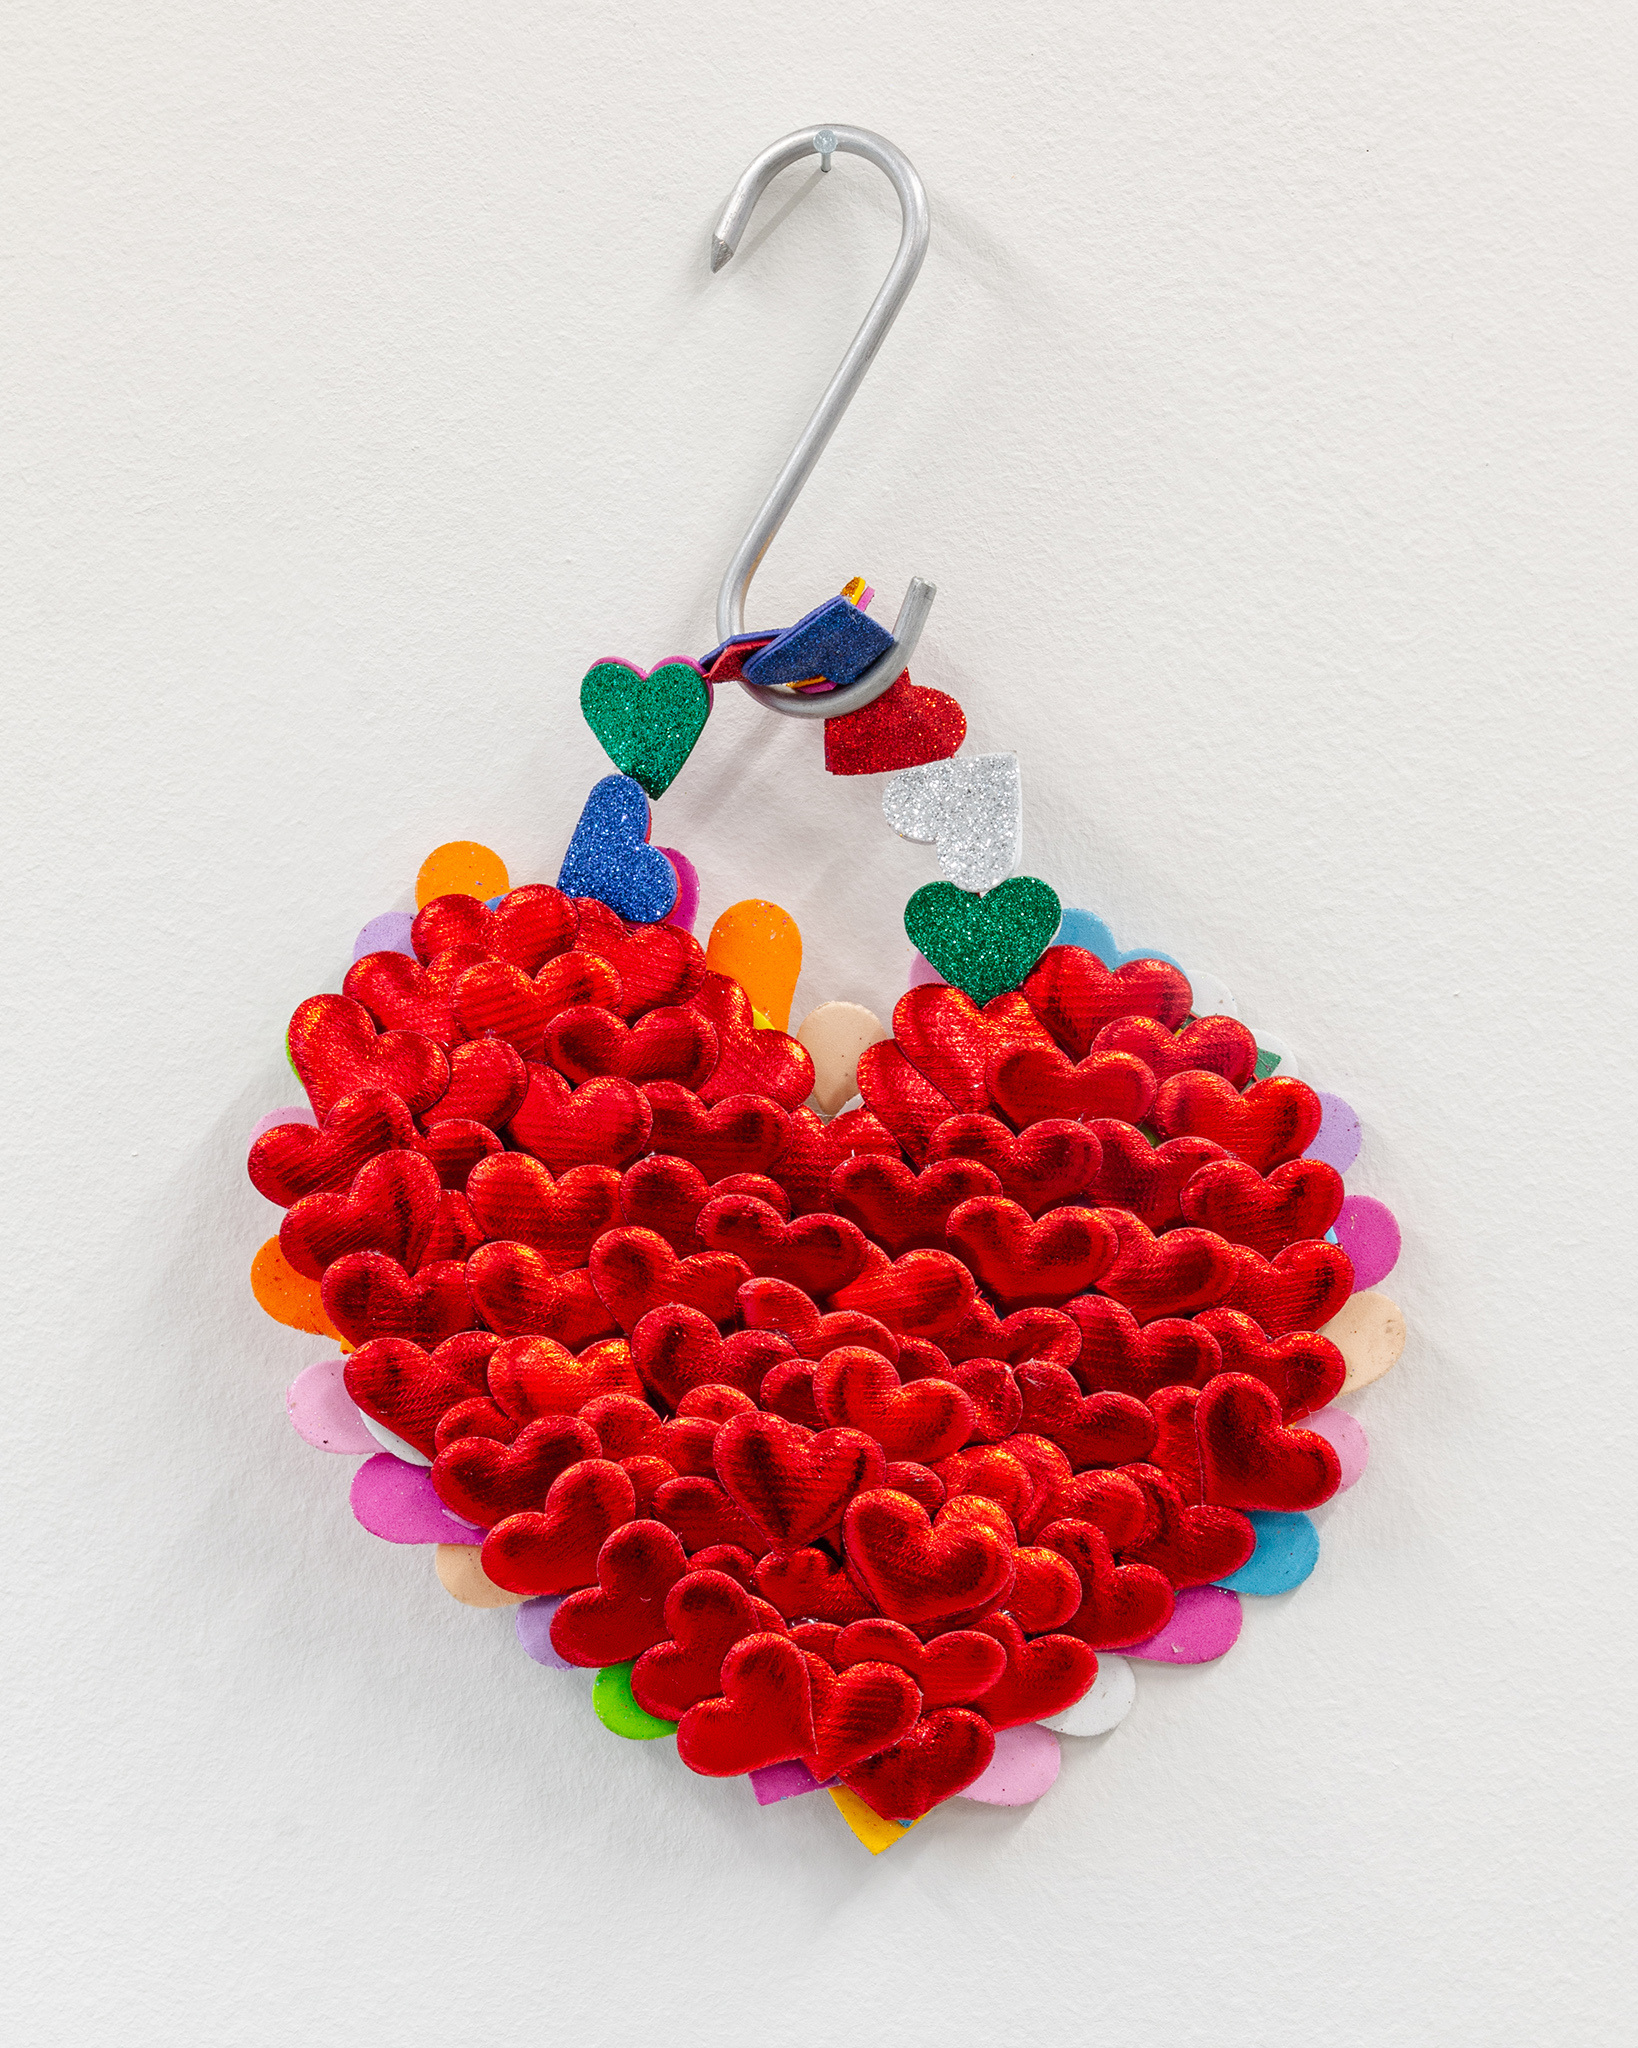 Exhibition view Our Labor, Our Passion, Our Love; Marisabel Arias, I am only for you love, detail, 2024, hearts, glitter, hook, 25x37x10cm, CALM – Centre d’Art La Meute, 2024 / Photo: Théo Duﬂoo / Courtesy of the artist.